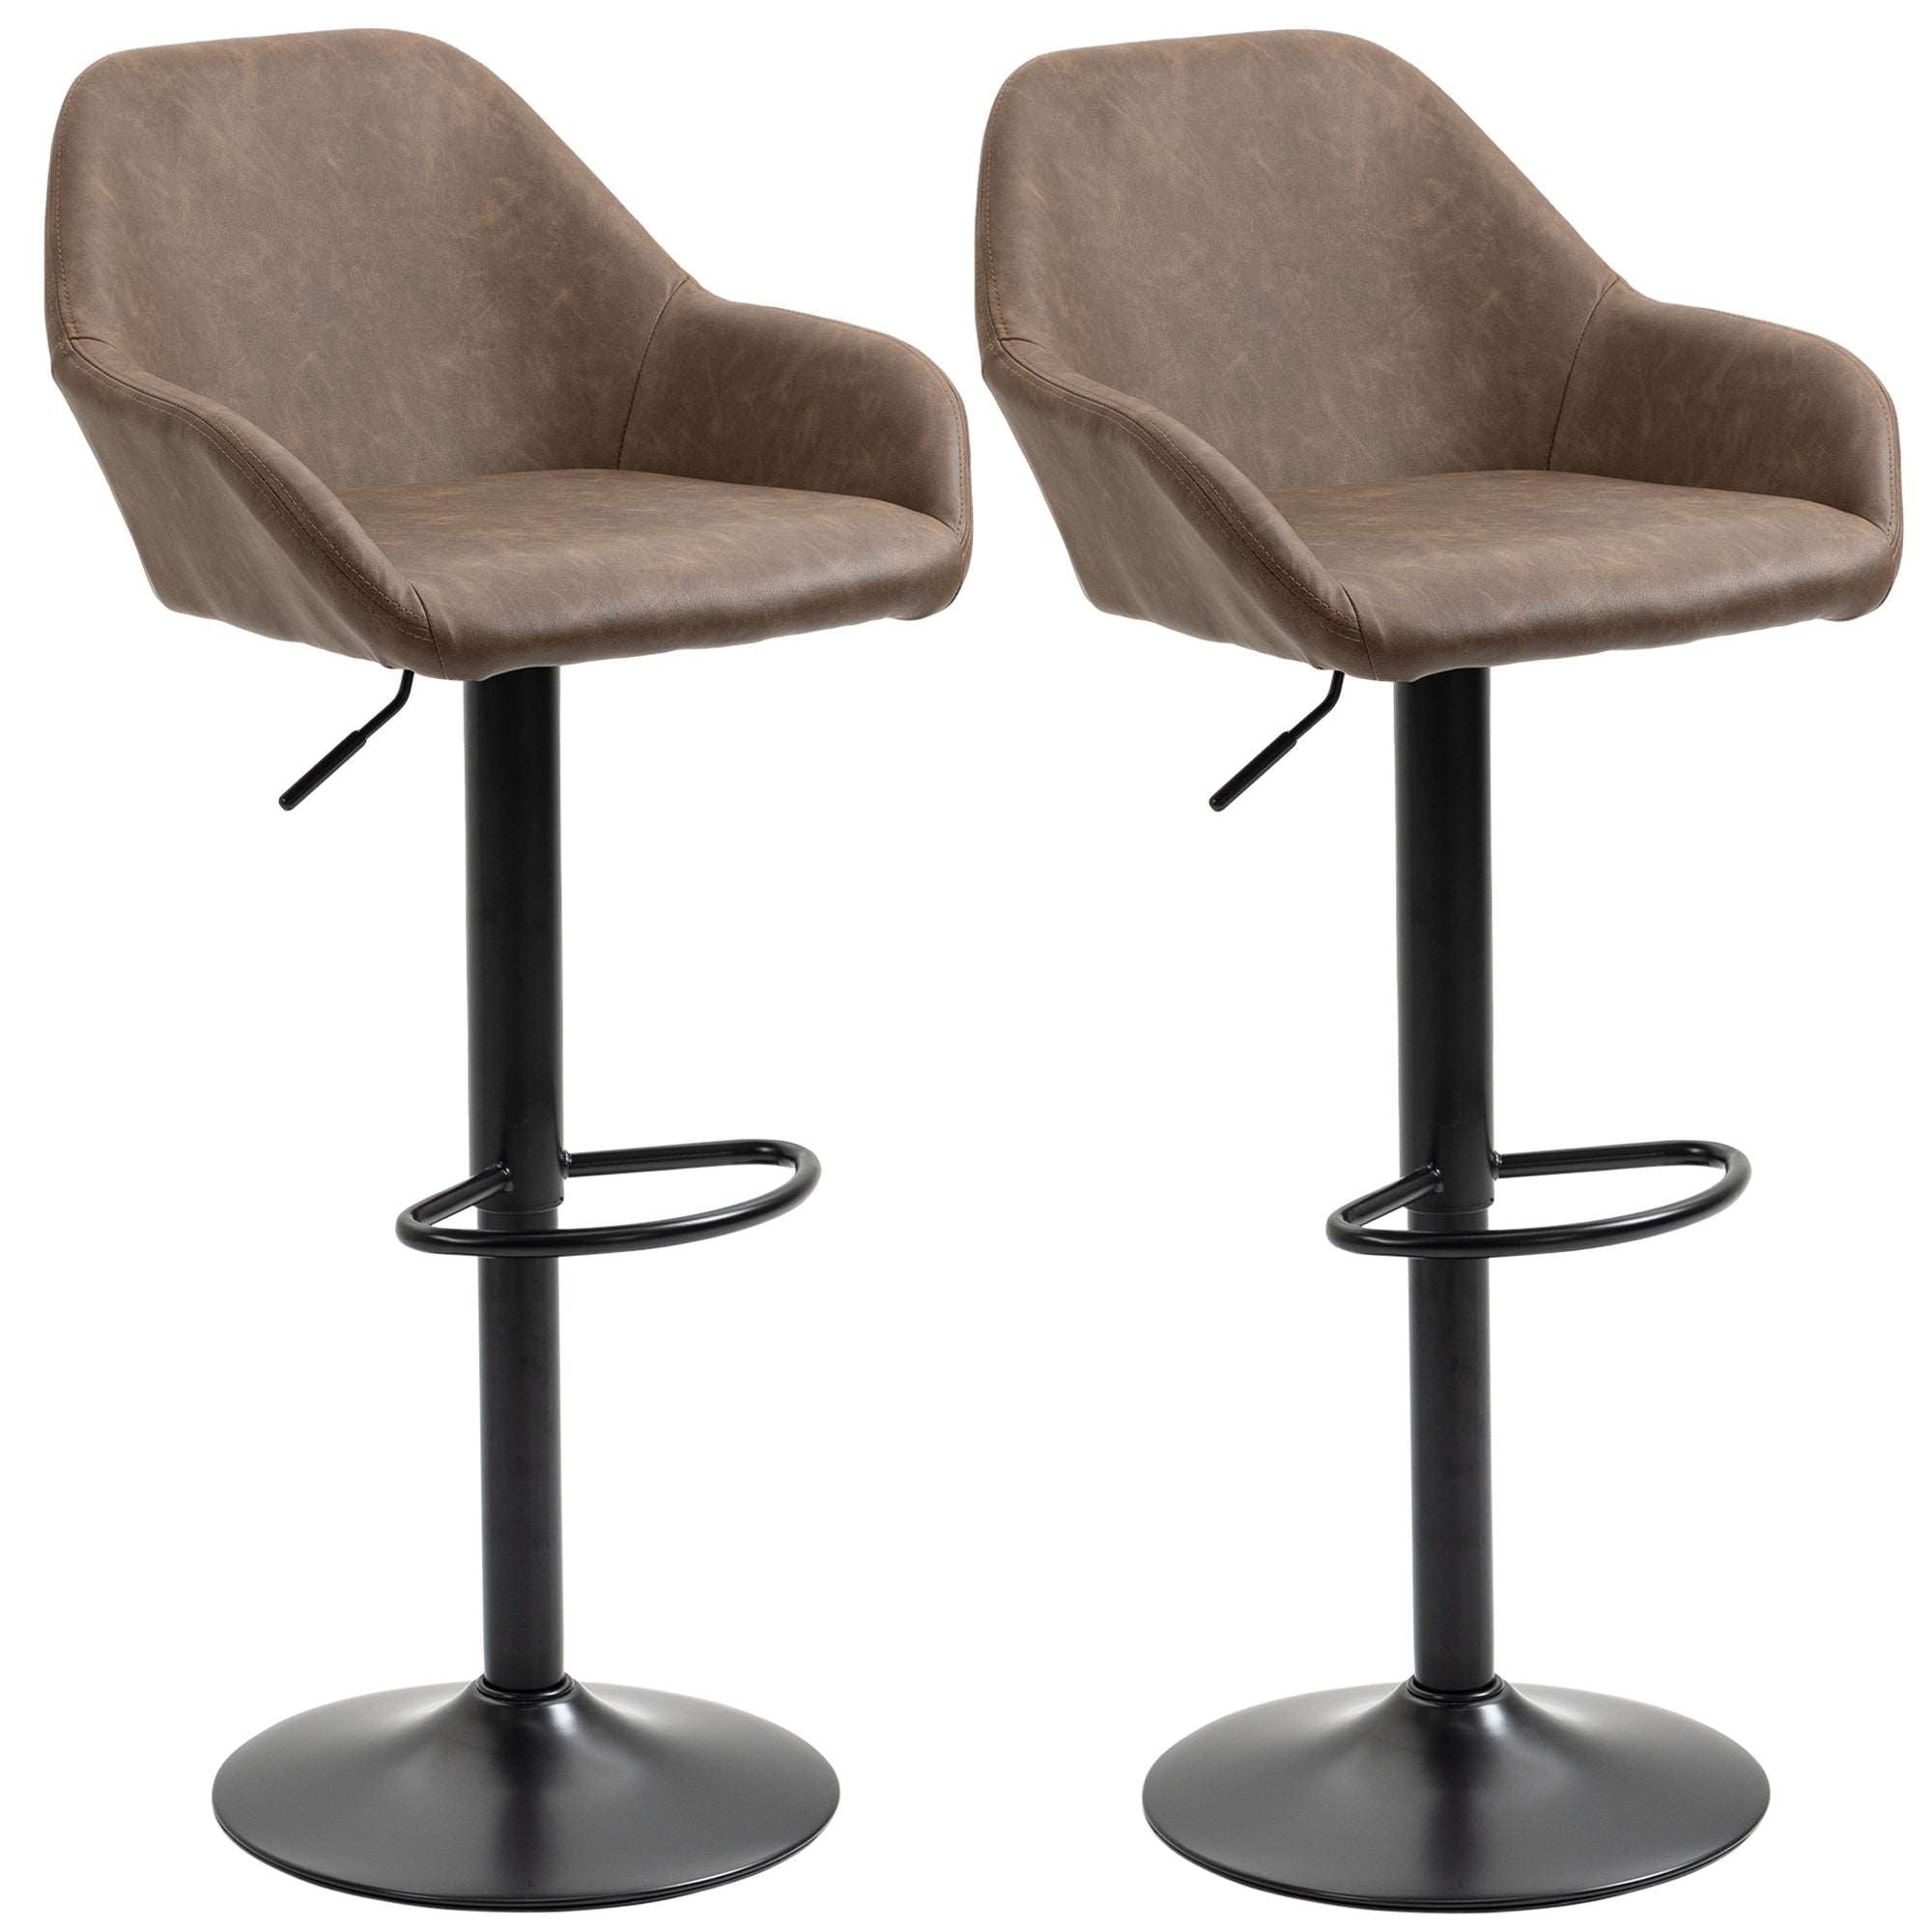 Adjustable Bar Stools Set of 2, Swivel Barstools with Footrest and Backrest, PU Leather Steel Base, for Kitchen Counter Dining Room Dark Brown  AOSOM   